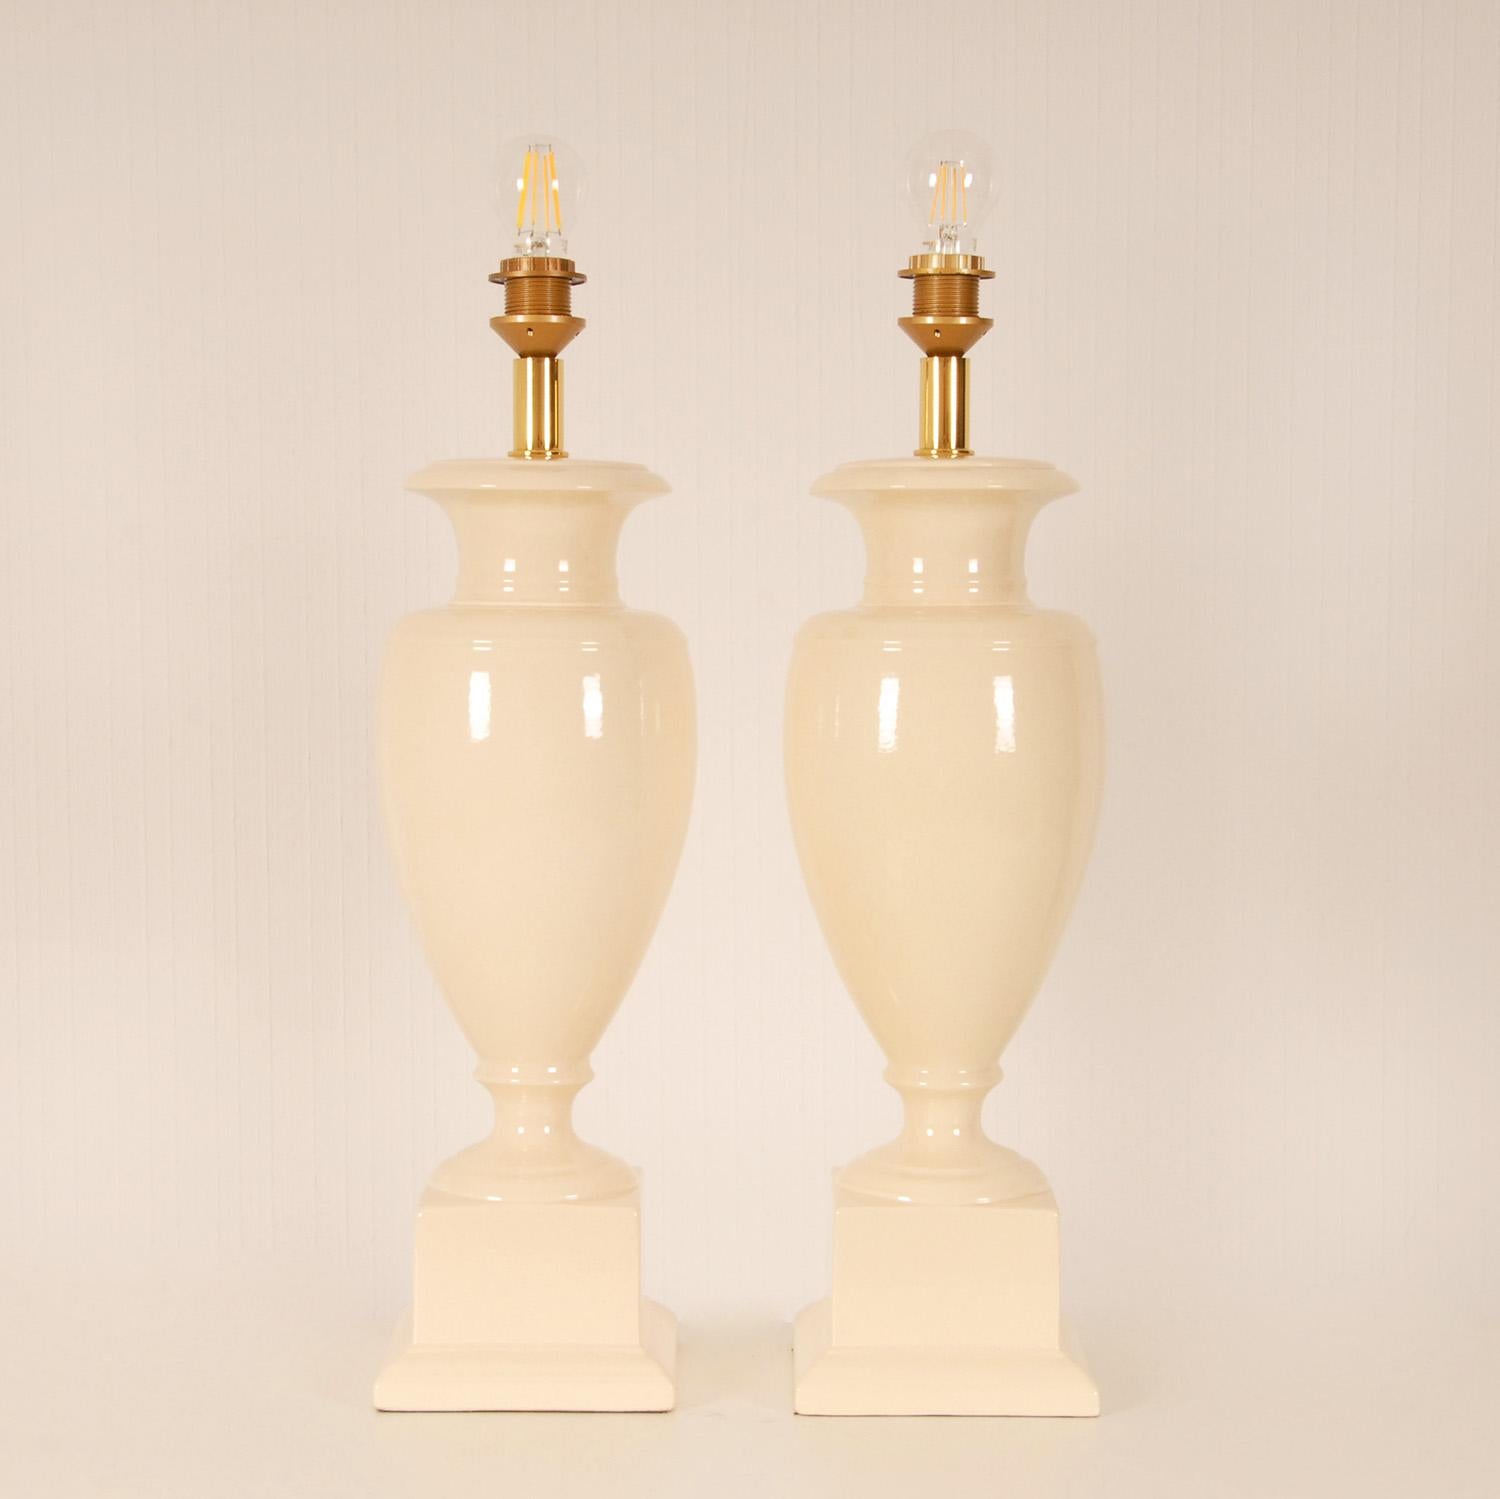 20th Century Vintage Italian Ceramic Vase Lamps off White Tall Modern Table Lamps, a Pair